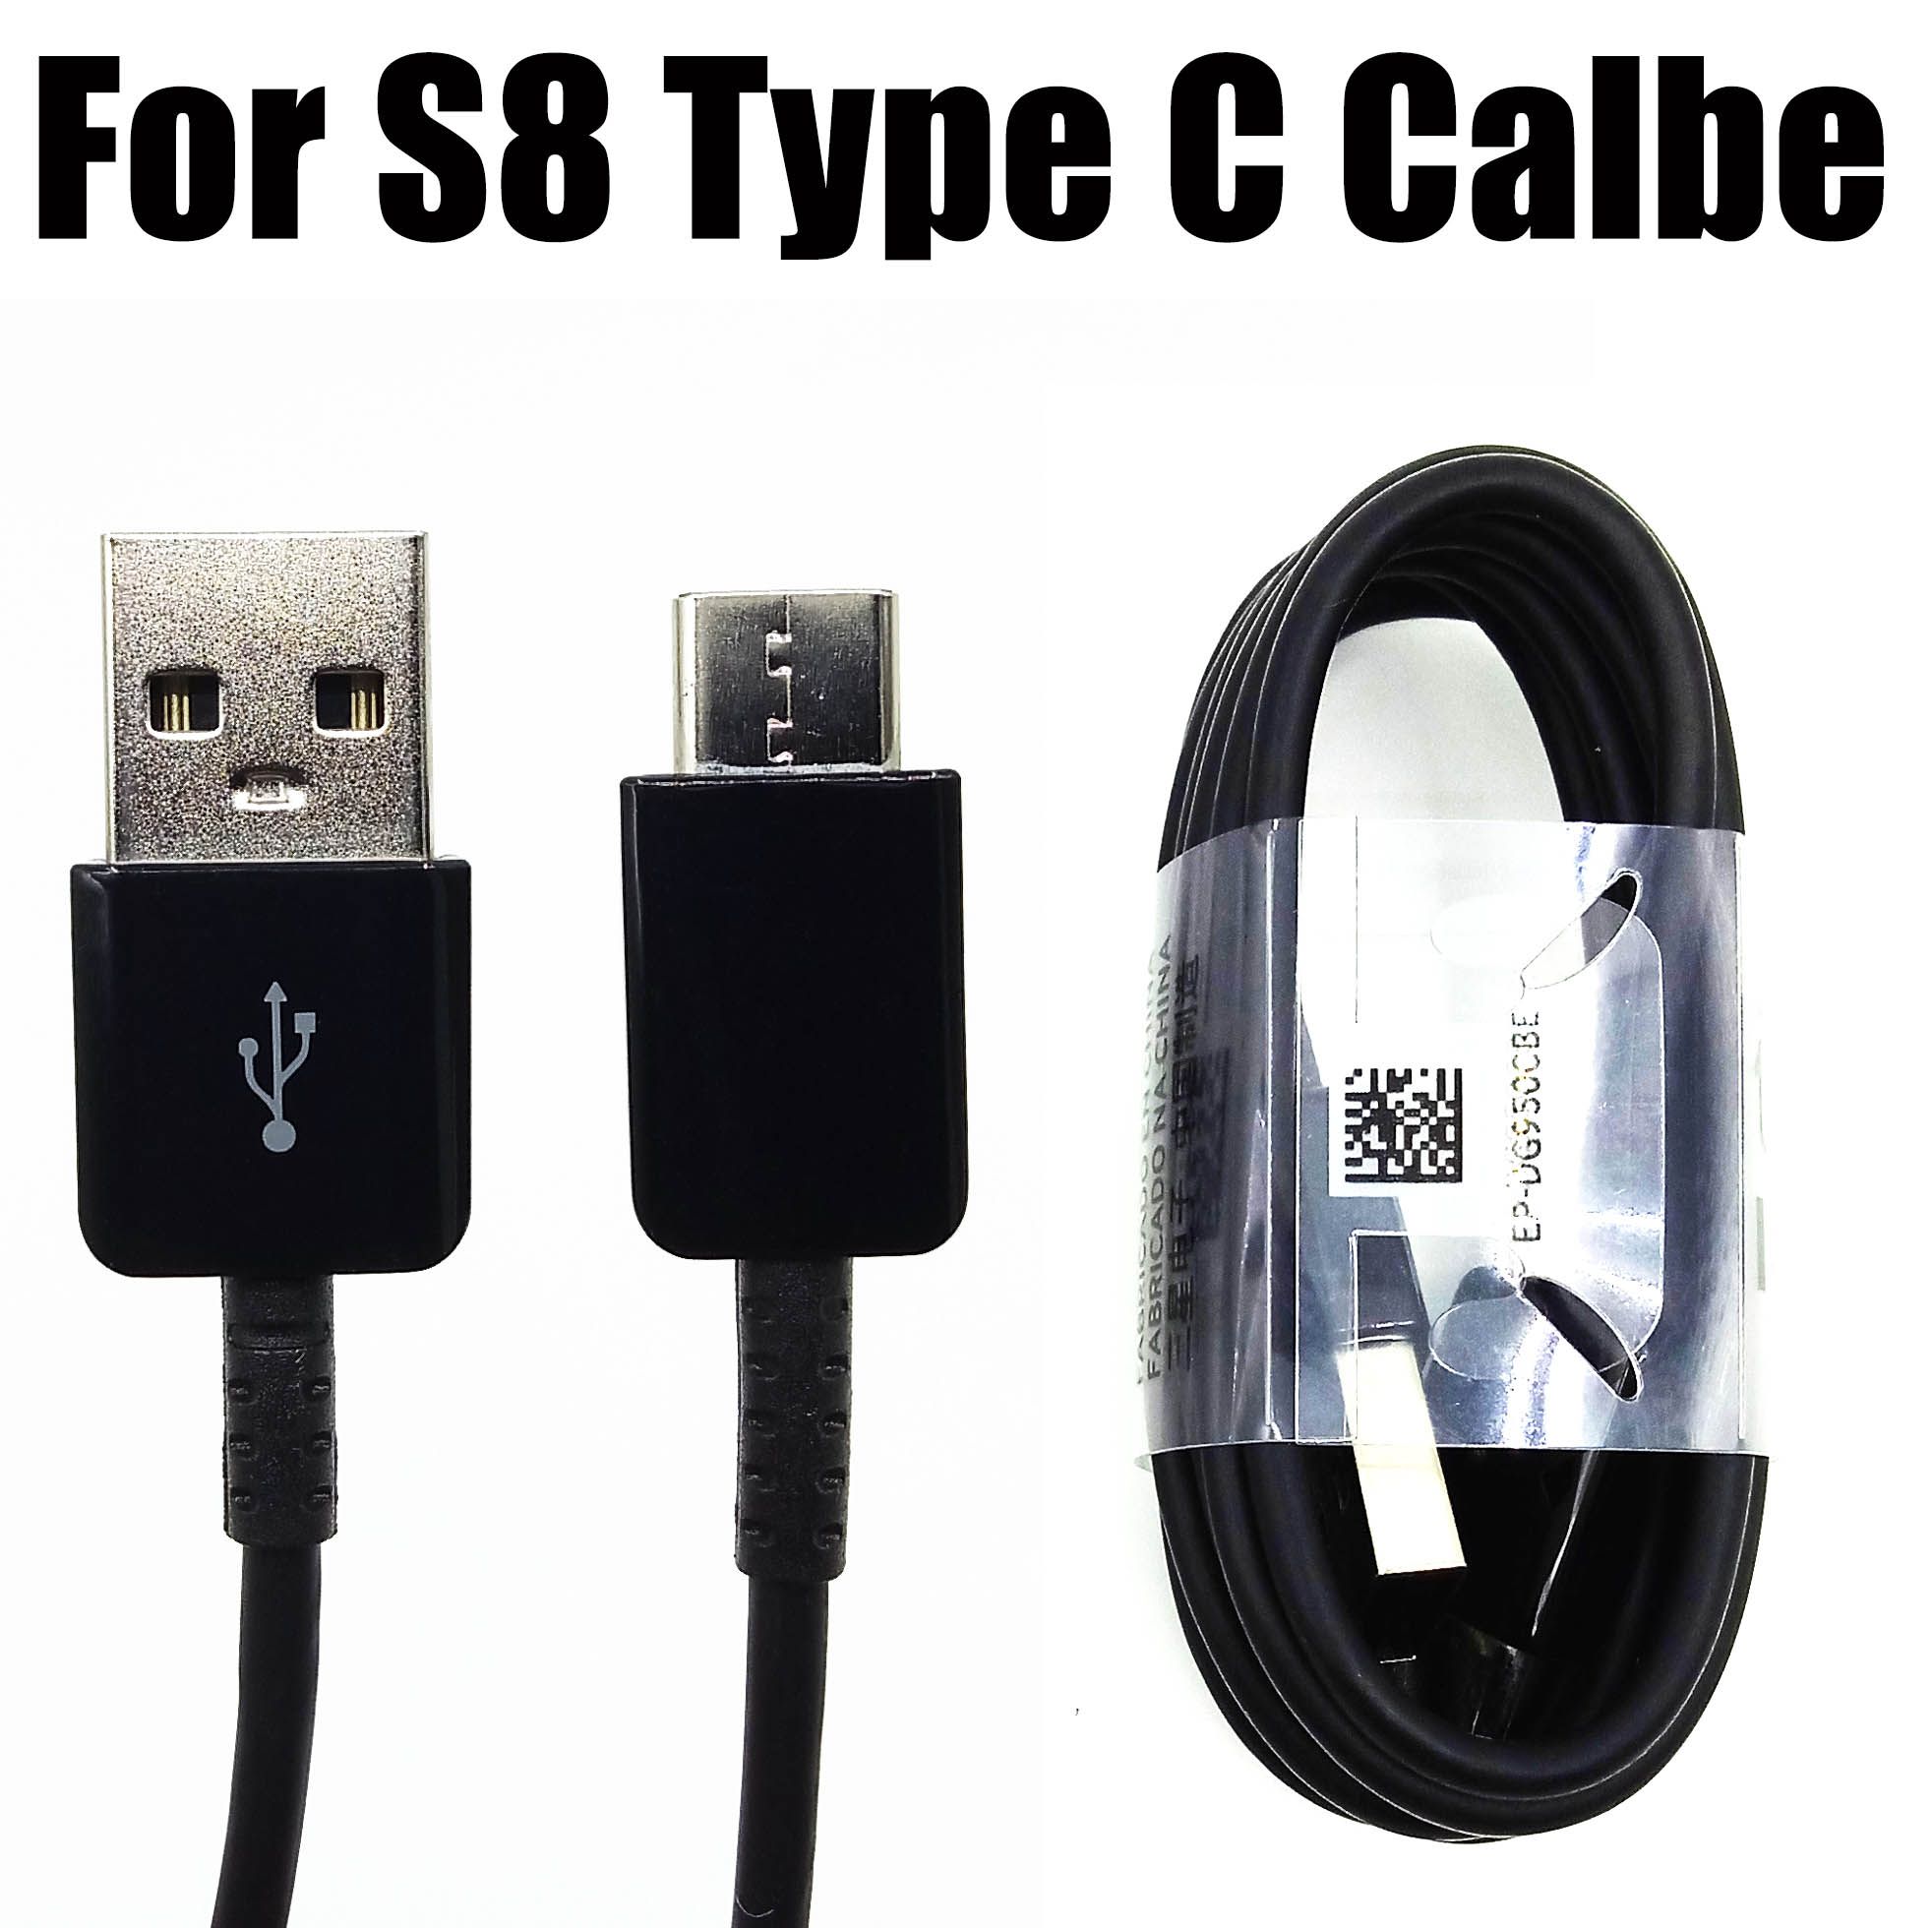 For S8 Type C Calbe (Best quality)